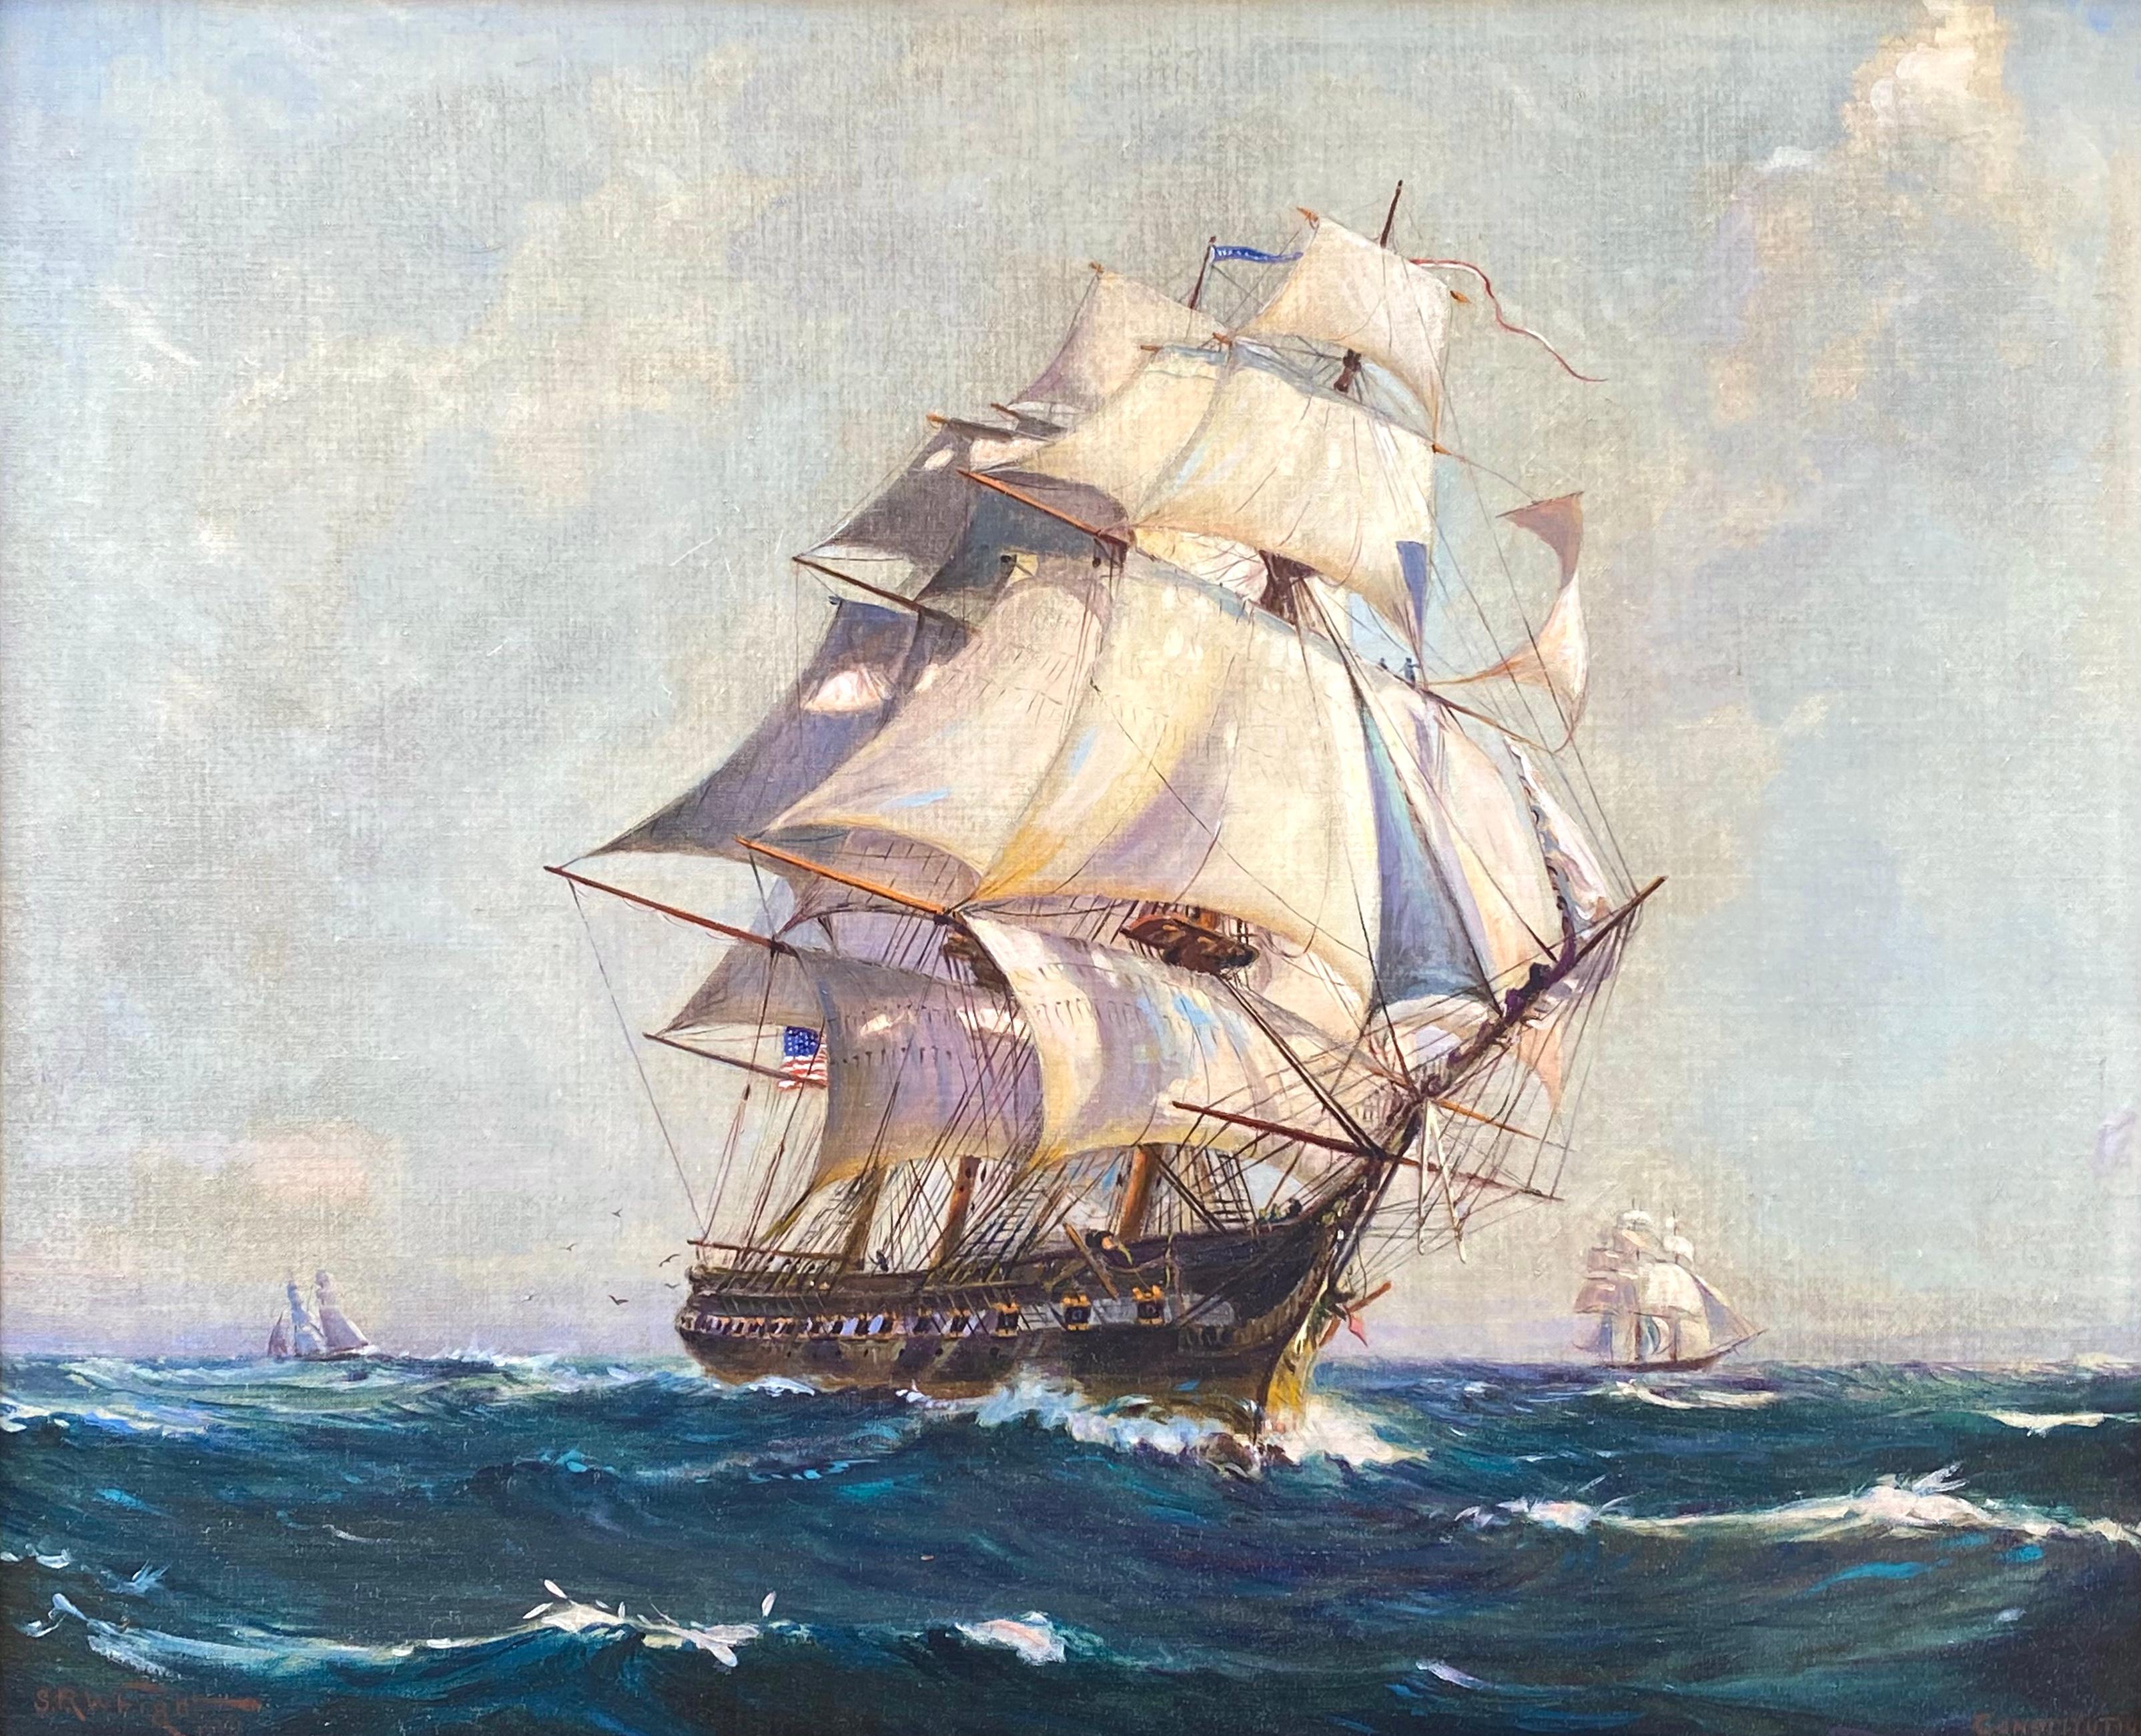 “U.S.S. Constitution 1797” - Painting by S.R. Wright